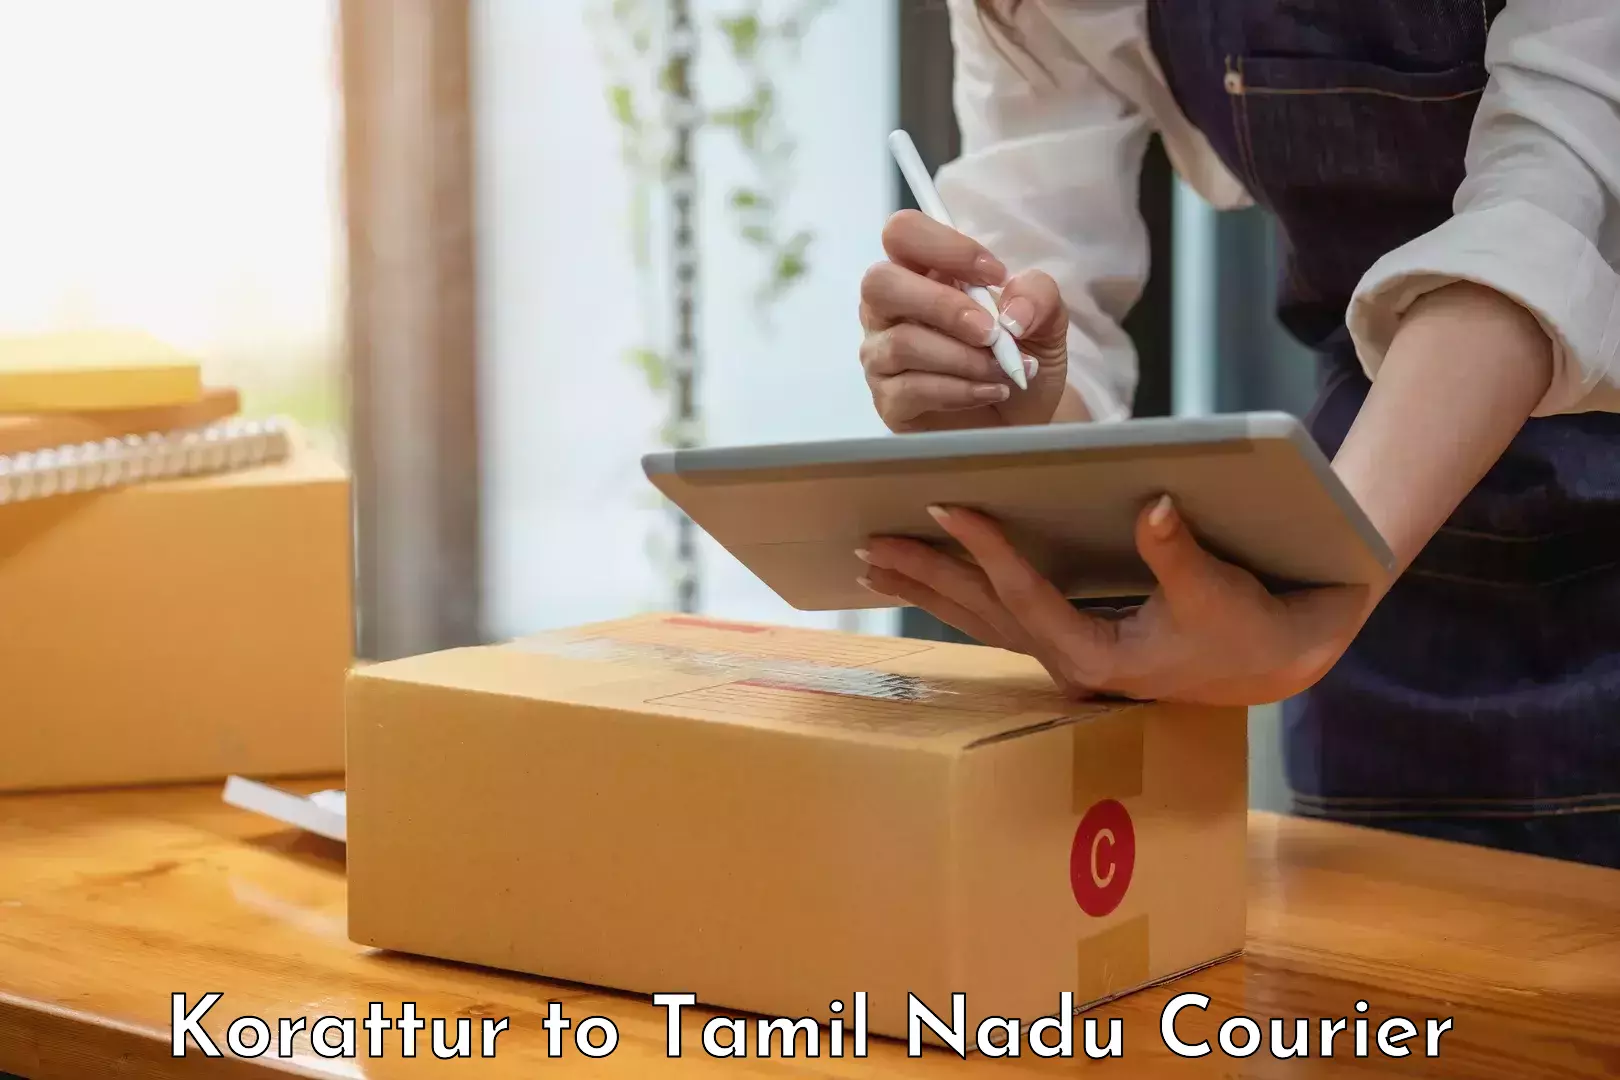 Next-day delivery options Korattur to Erode